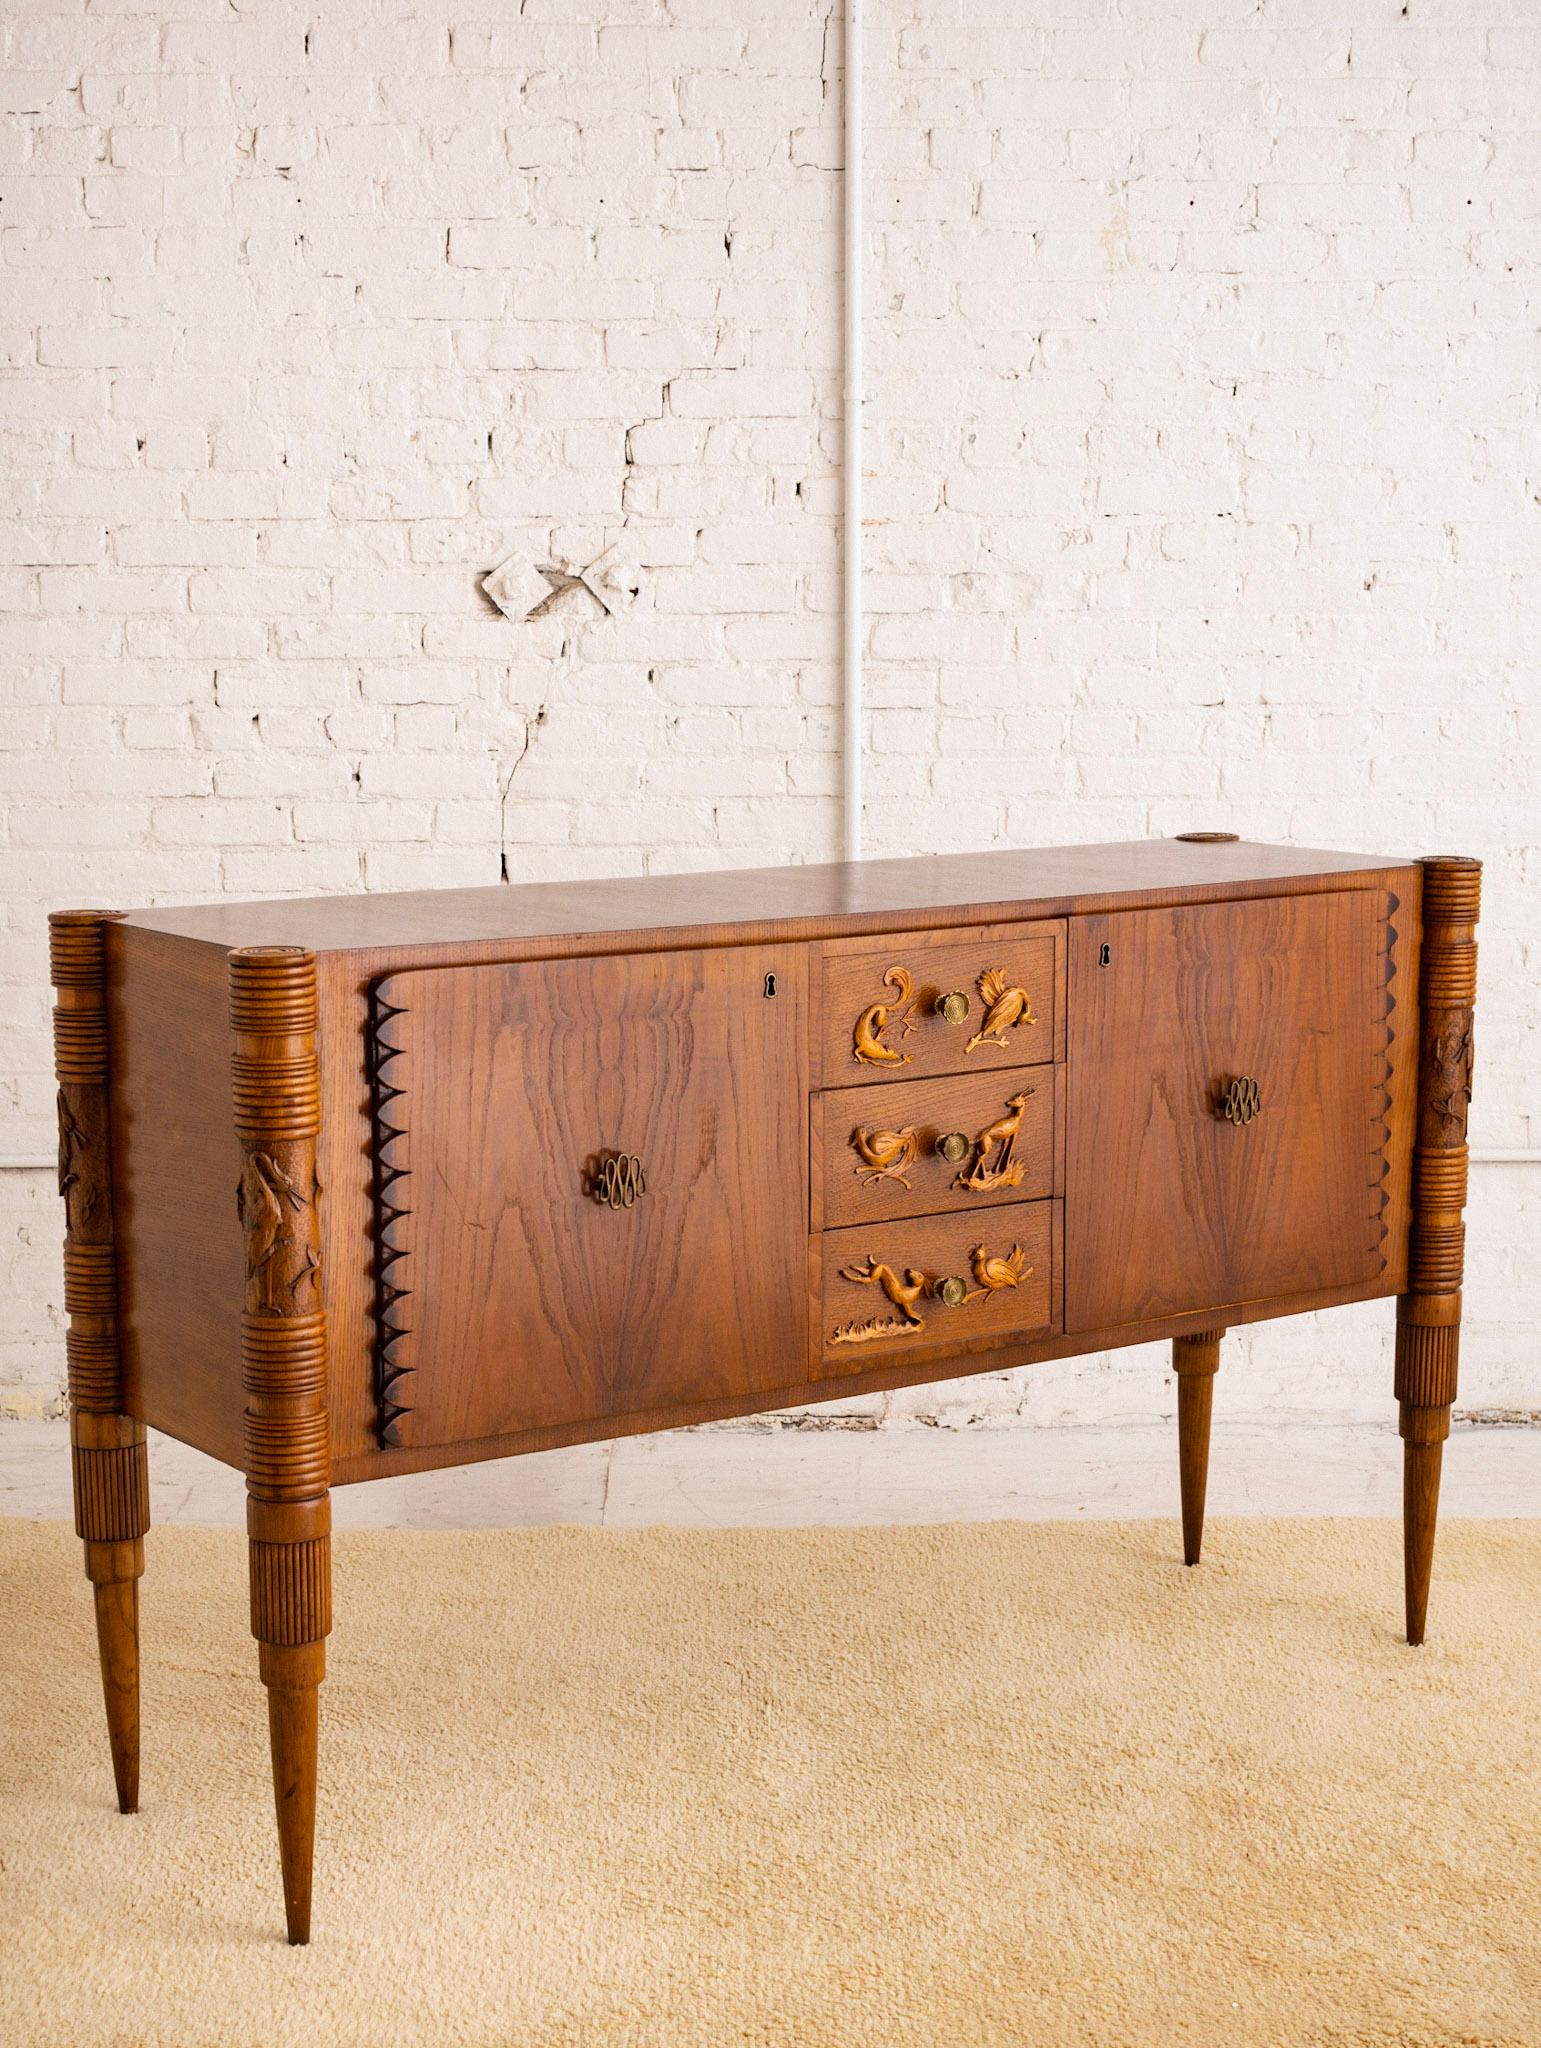 A mid century Italian sideboard / credenza by designer Pier Luigi Colli. Carved animal reliefs and spindle legs with Art Deco influences. Brass accents. Sourced outside of Milan, Italy.